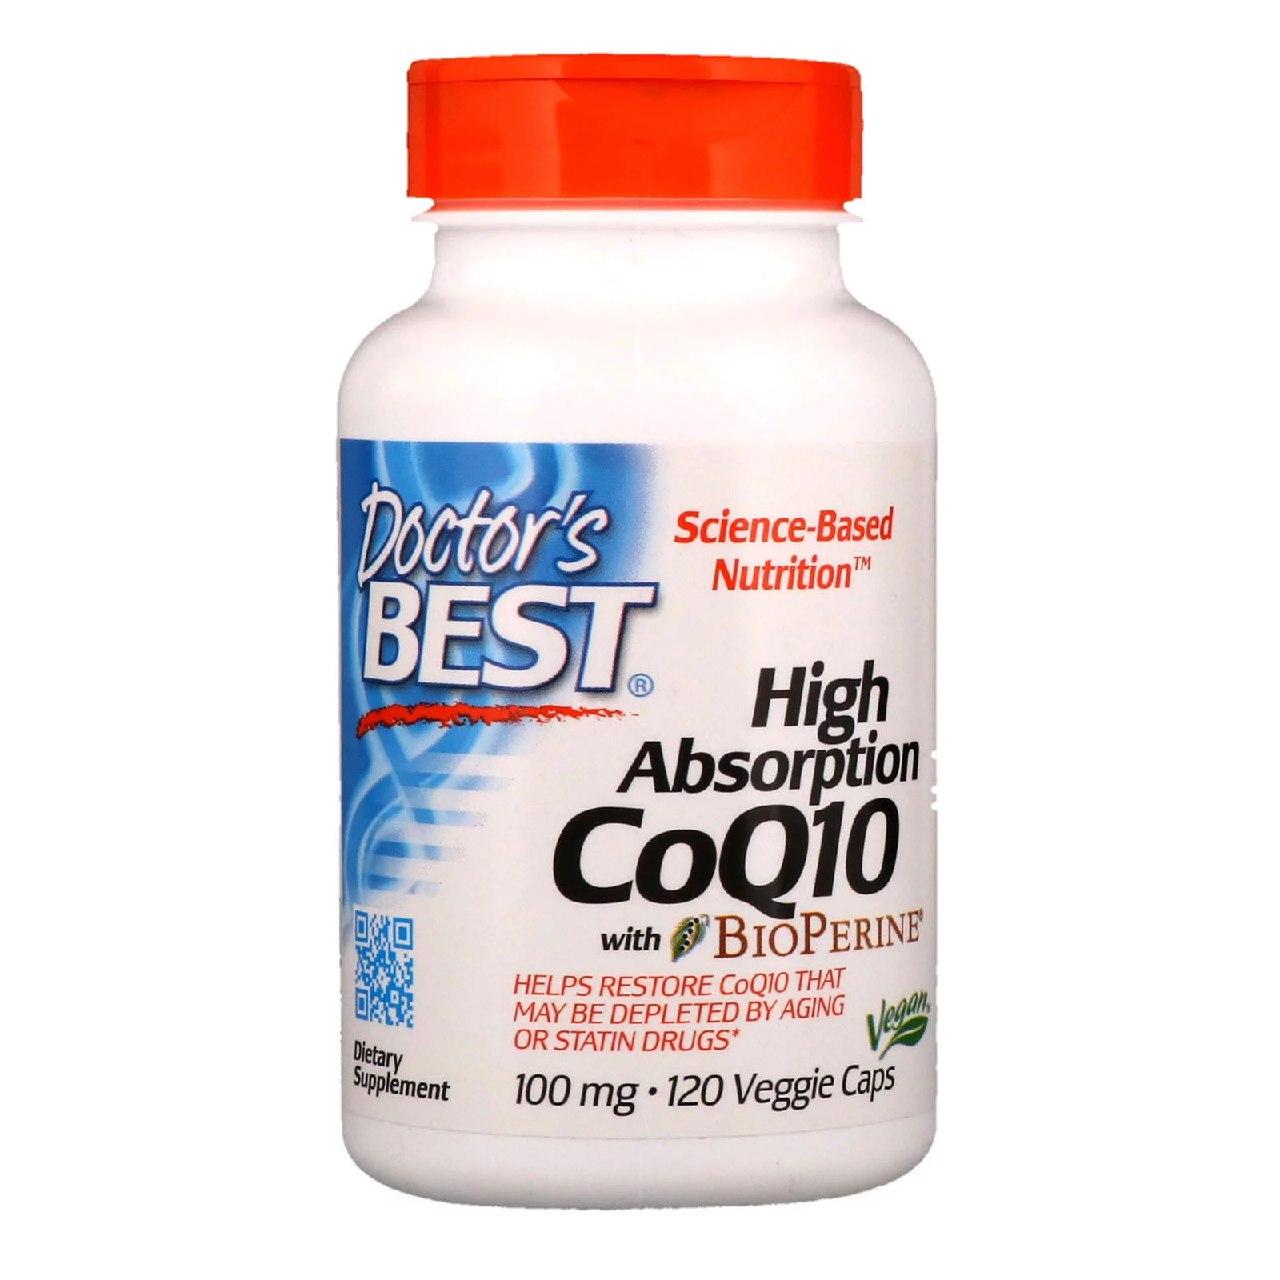 High Absorption CoQ10 with BioPerine Doctor's Best 100 mg 120 Caps,  мл, Doctor's BEST. Спец препараты. 